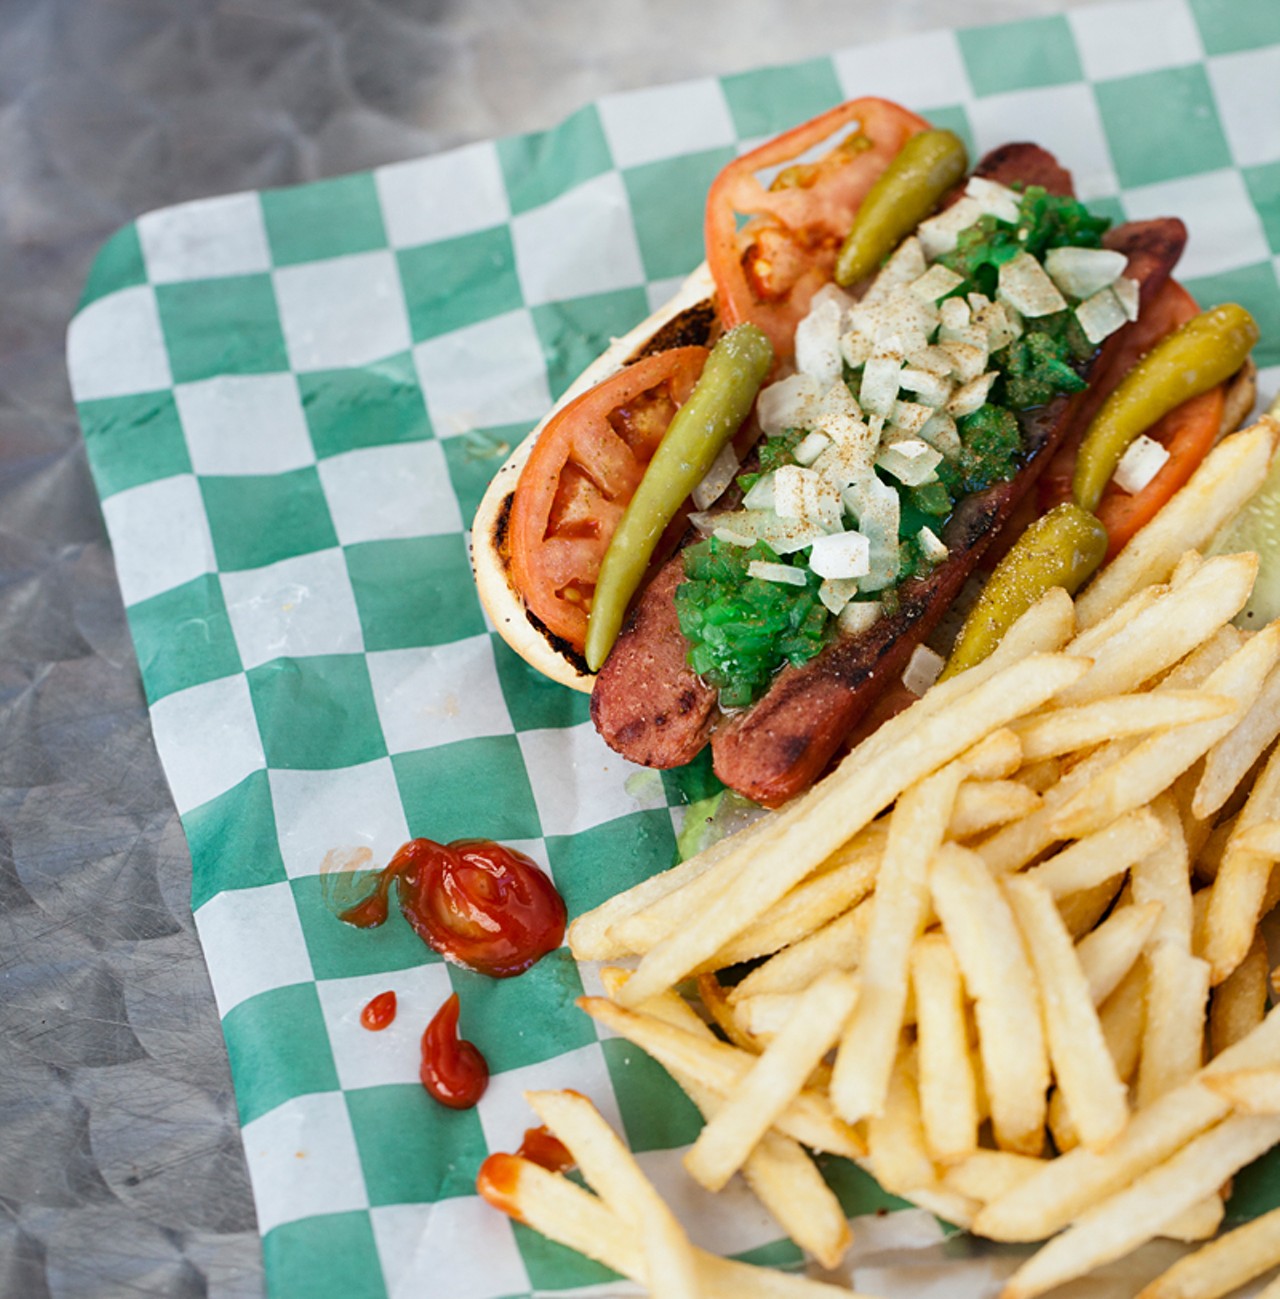 The "Downtown Dog" is topped with relish, onions, peppers, pickle, tomato and celery salt.